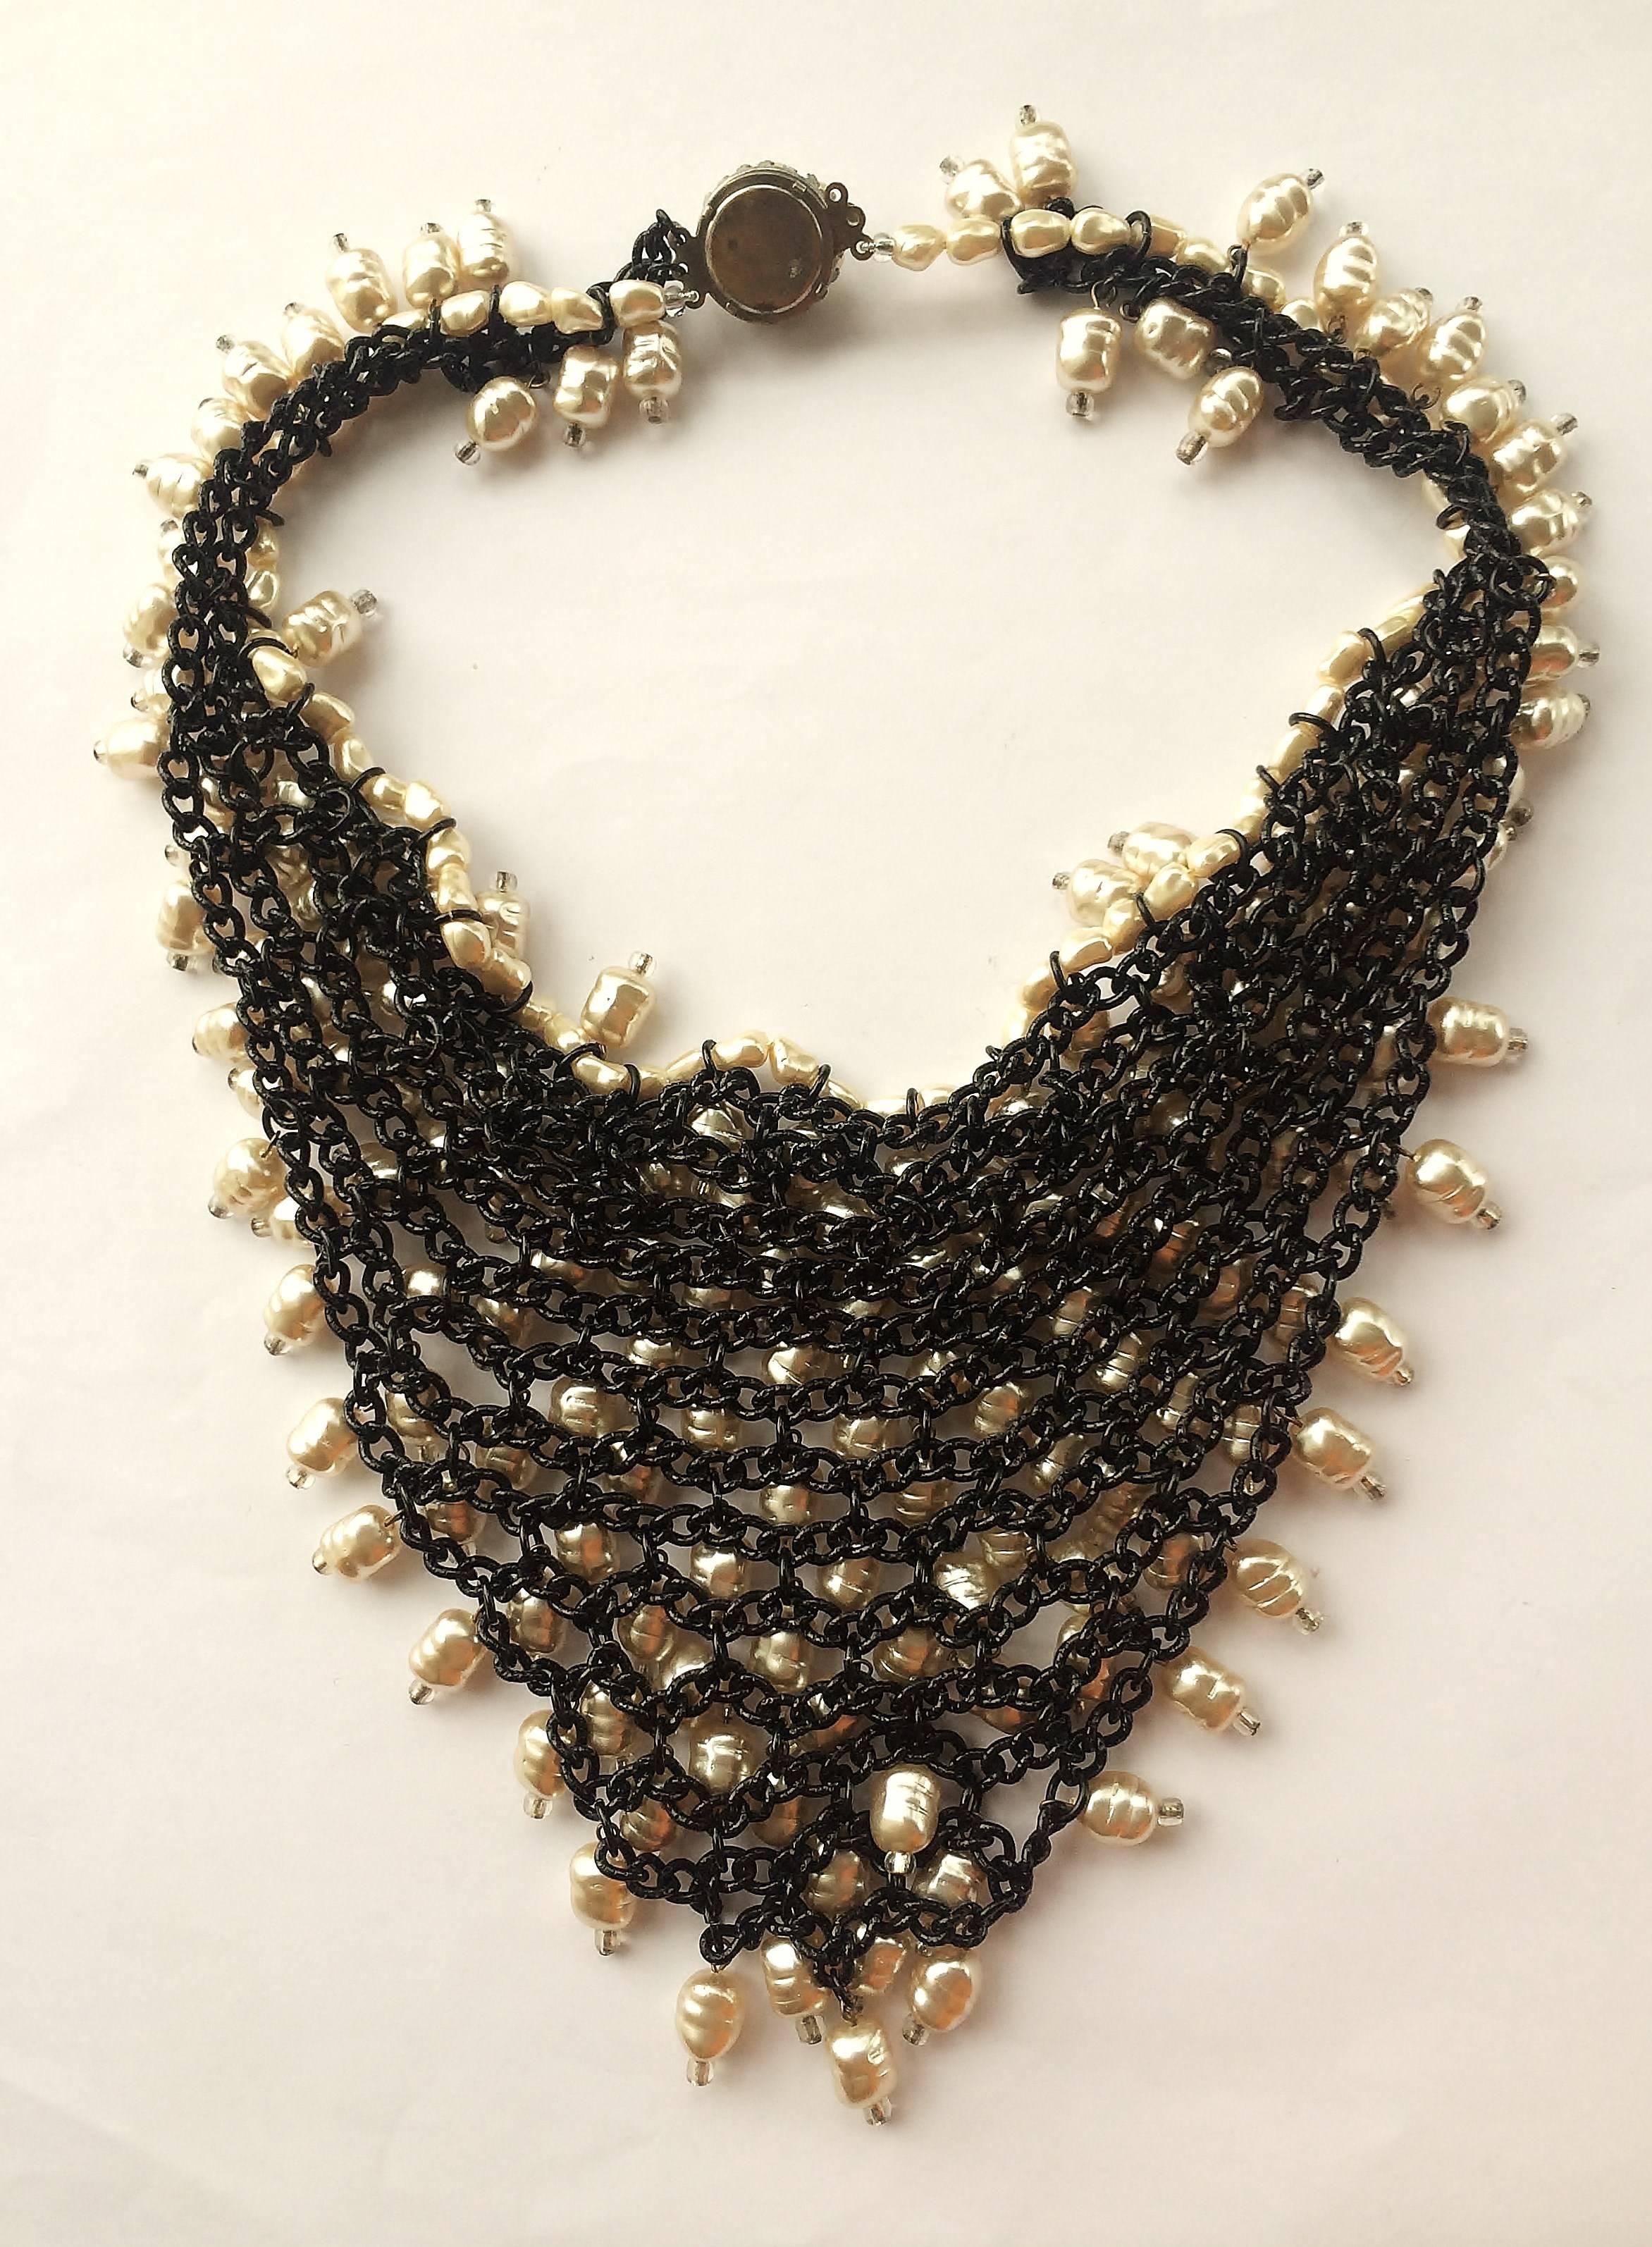 Highly striking and unusual glass baroque pearl 'bib' necklace, each pearl having a crystal bead at the end. The whole necklace is set on black metal or 'japanned' chain mail.
This is an unsigned necklace, maker unknown.